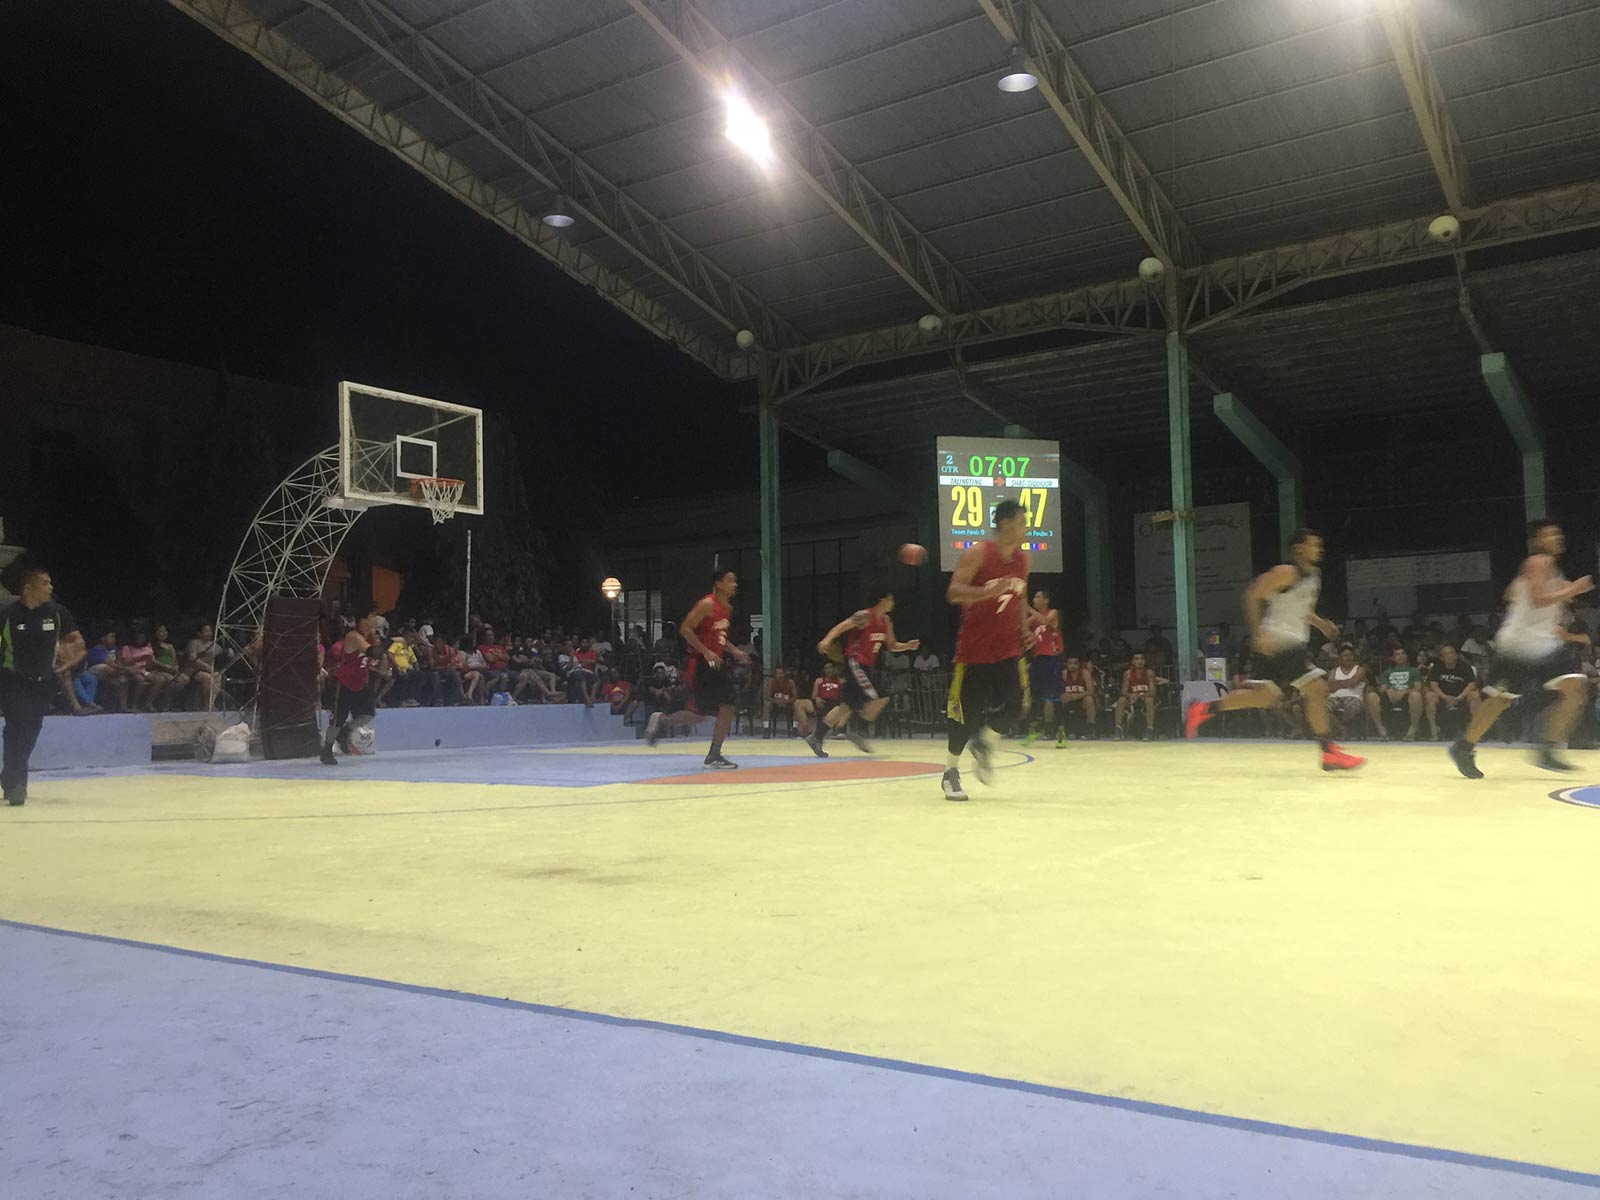 Basketball game at night in Siquijor, Philippines. Friendly locals and Siquijor